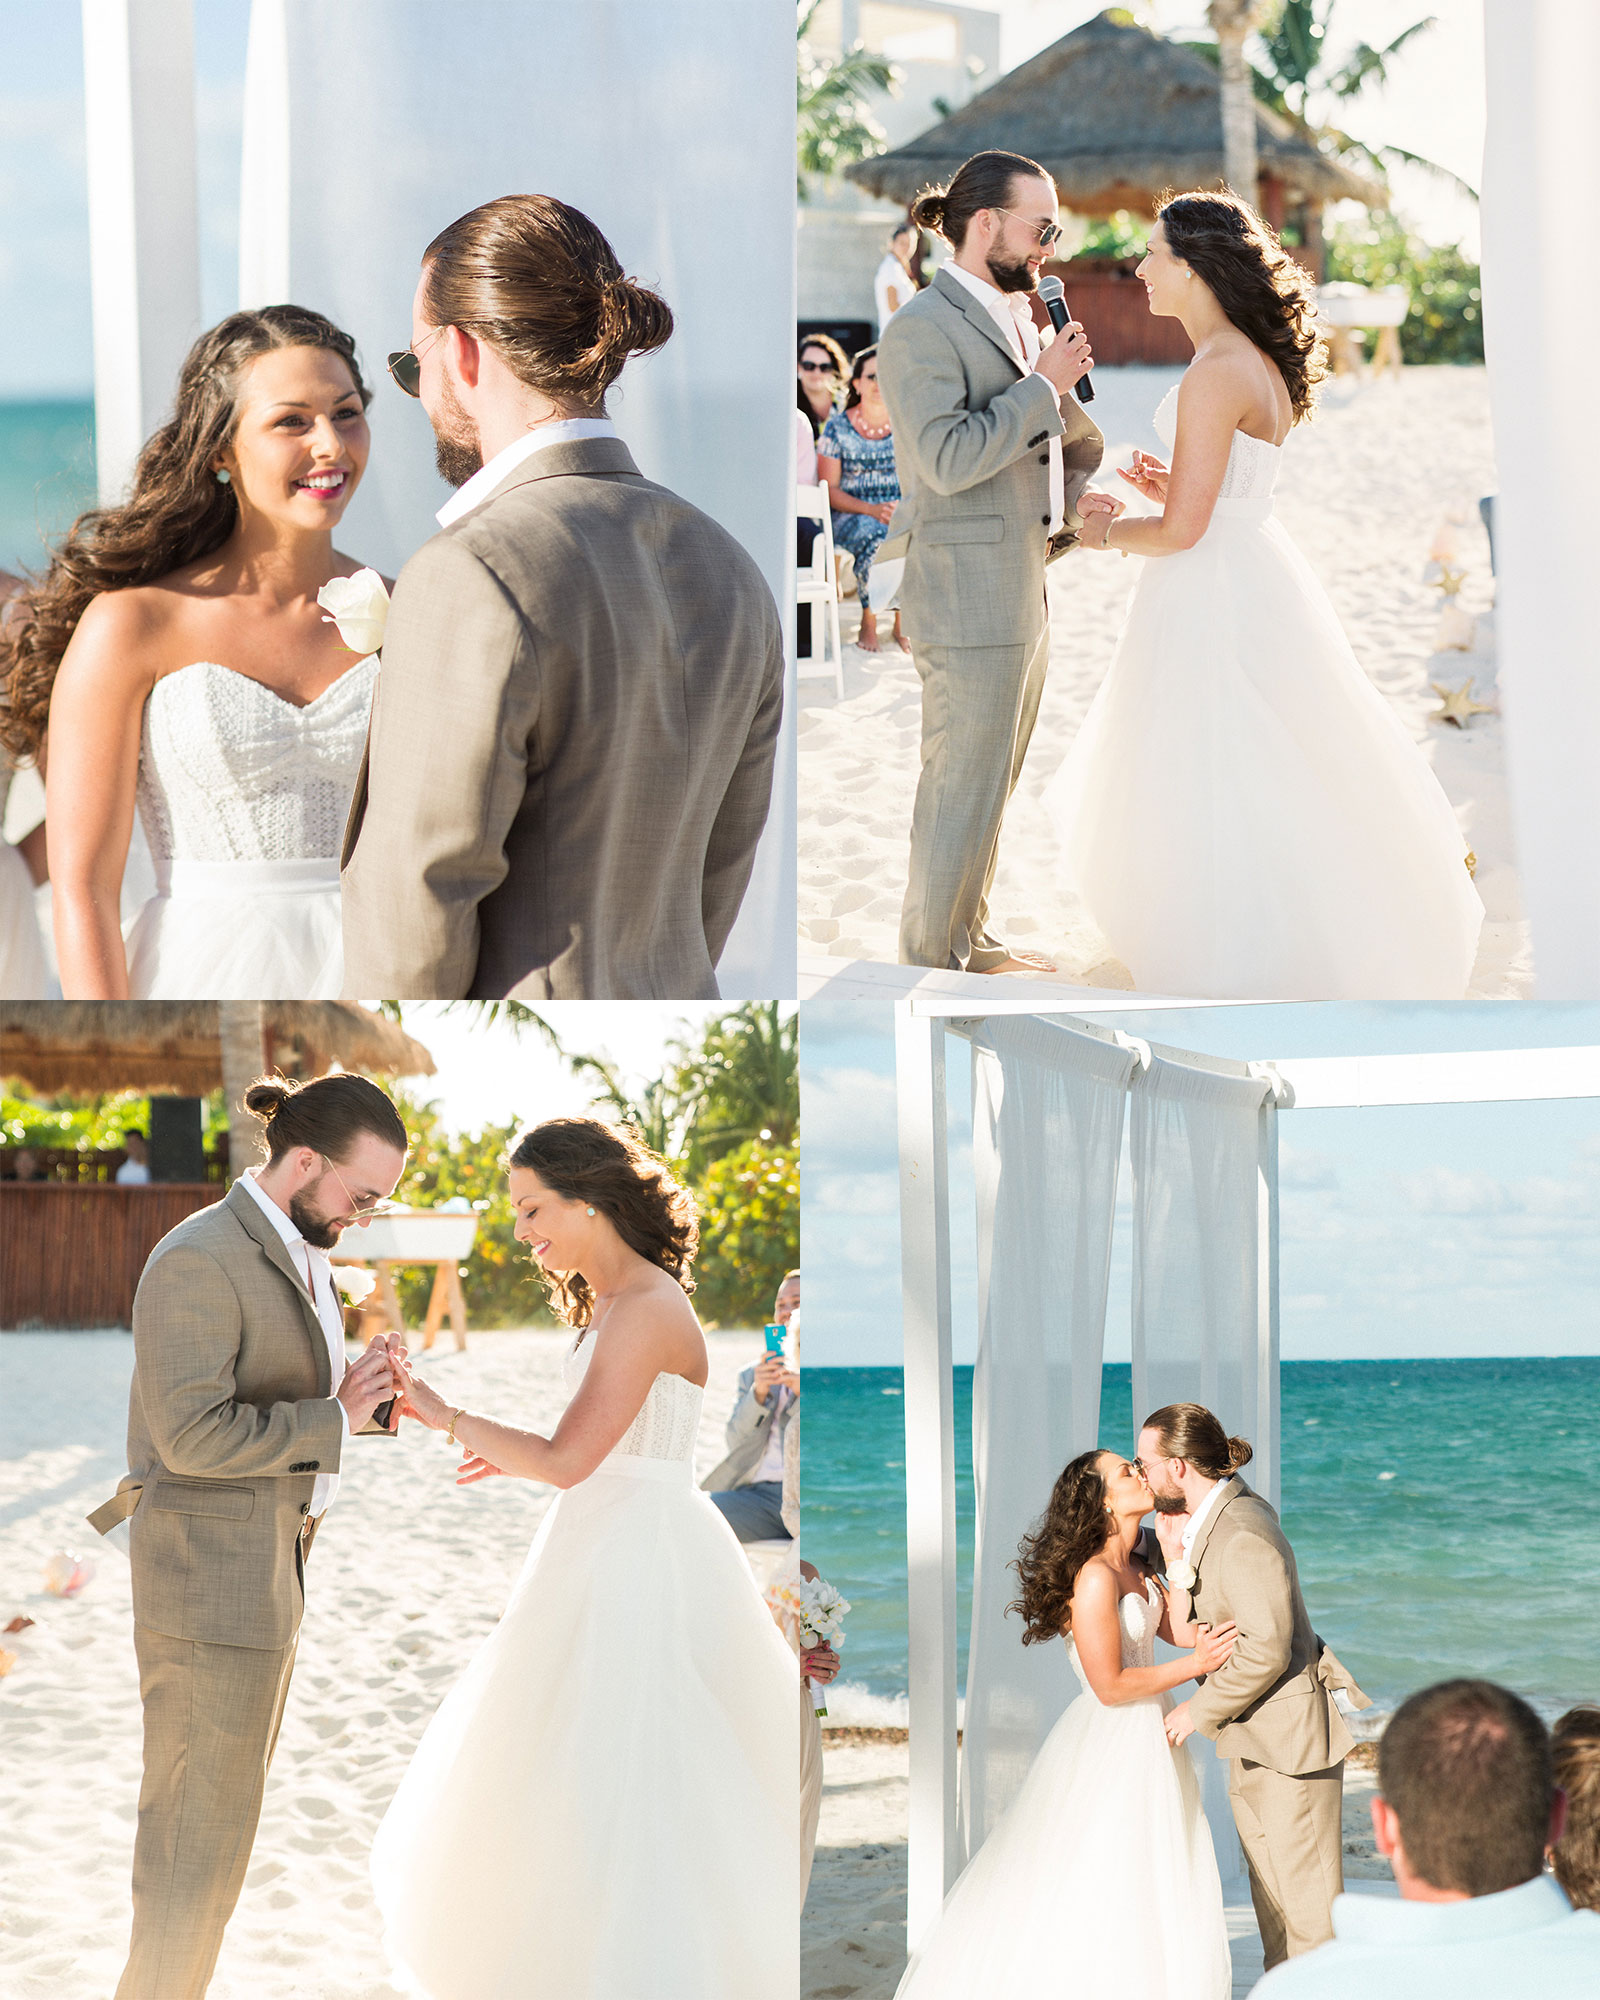 Destination wedding on the beach in Mexico, Bridal Separates, Watters Ashan skirt.